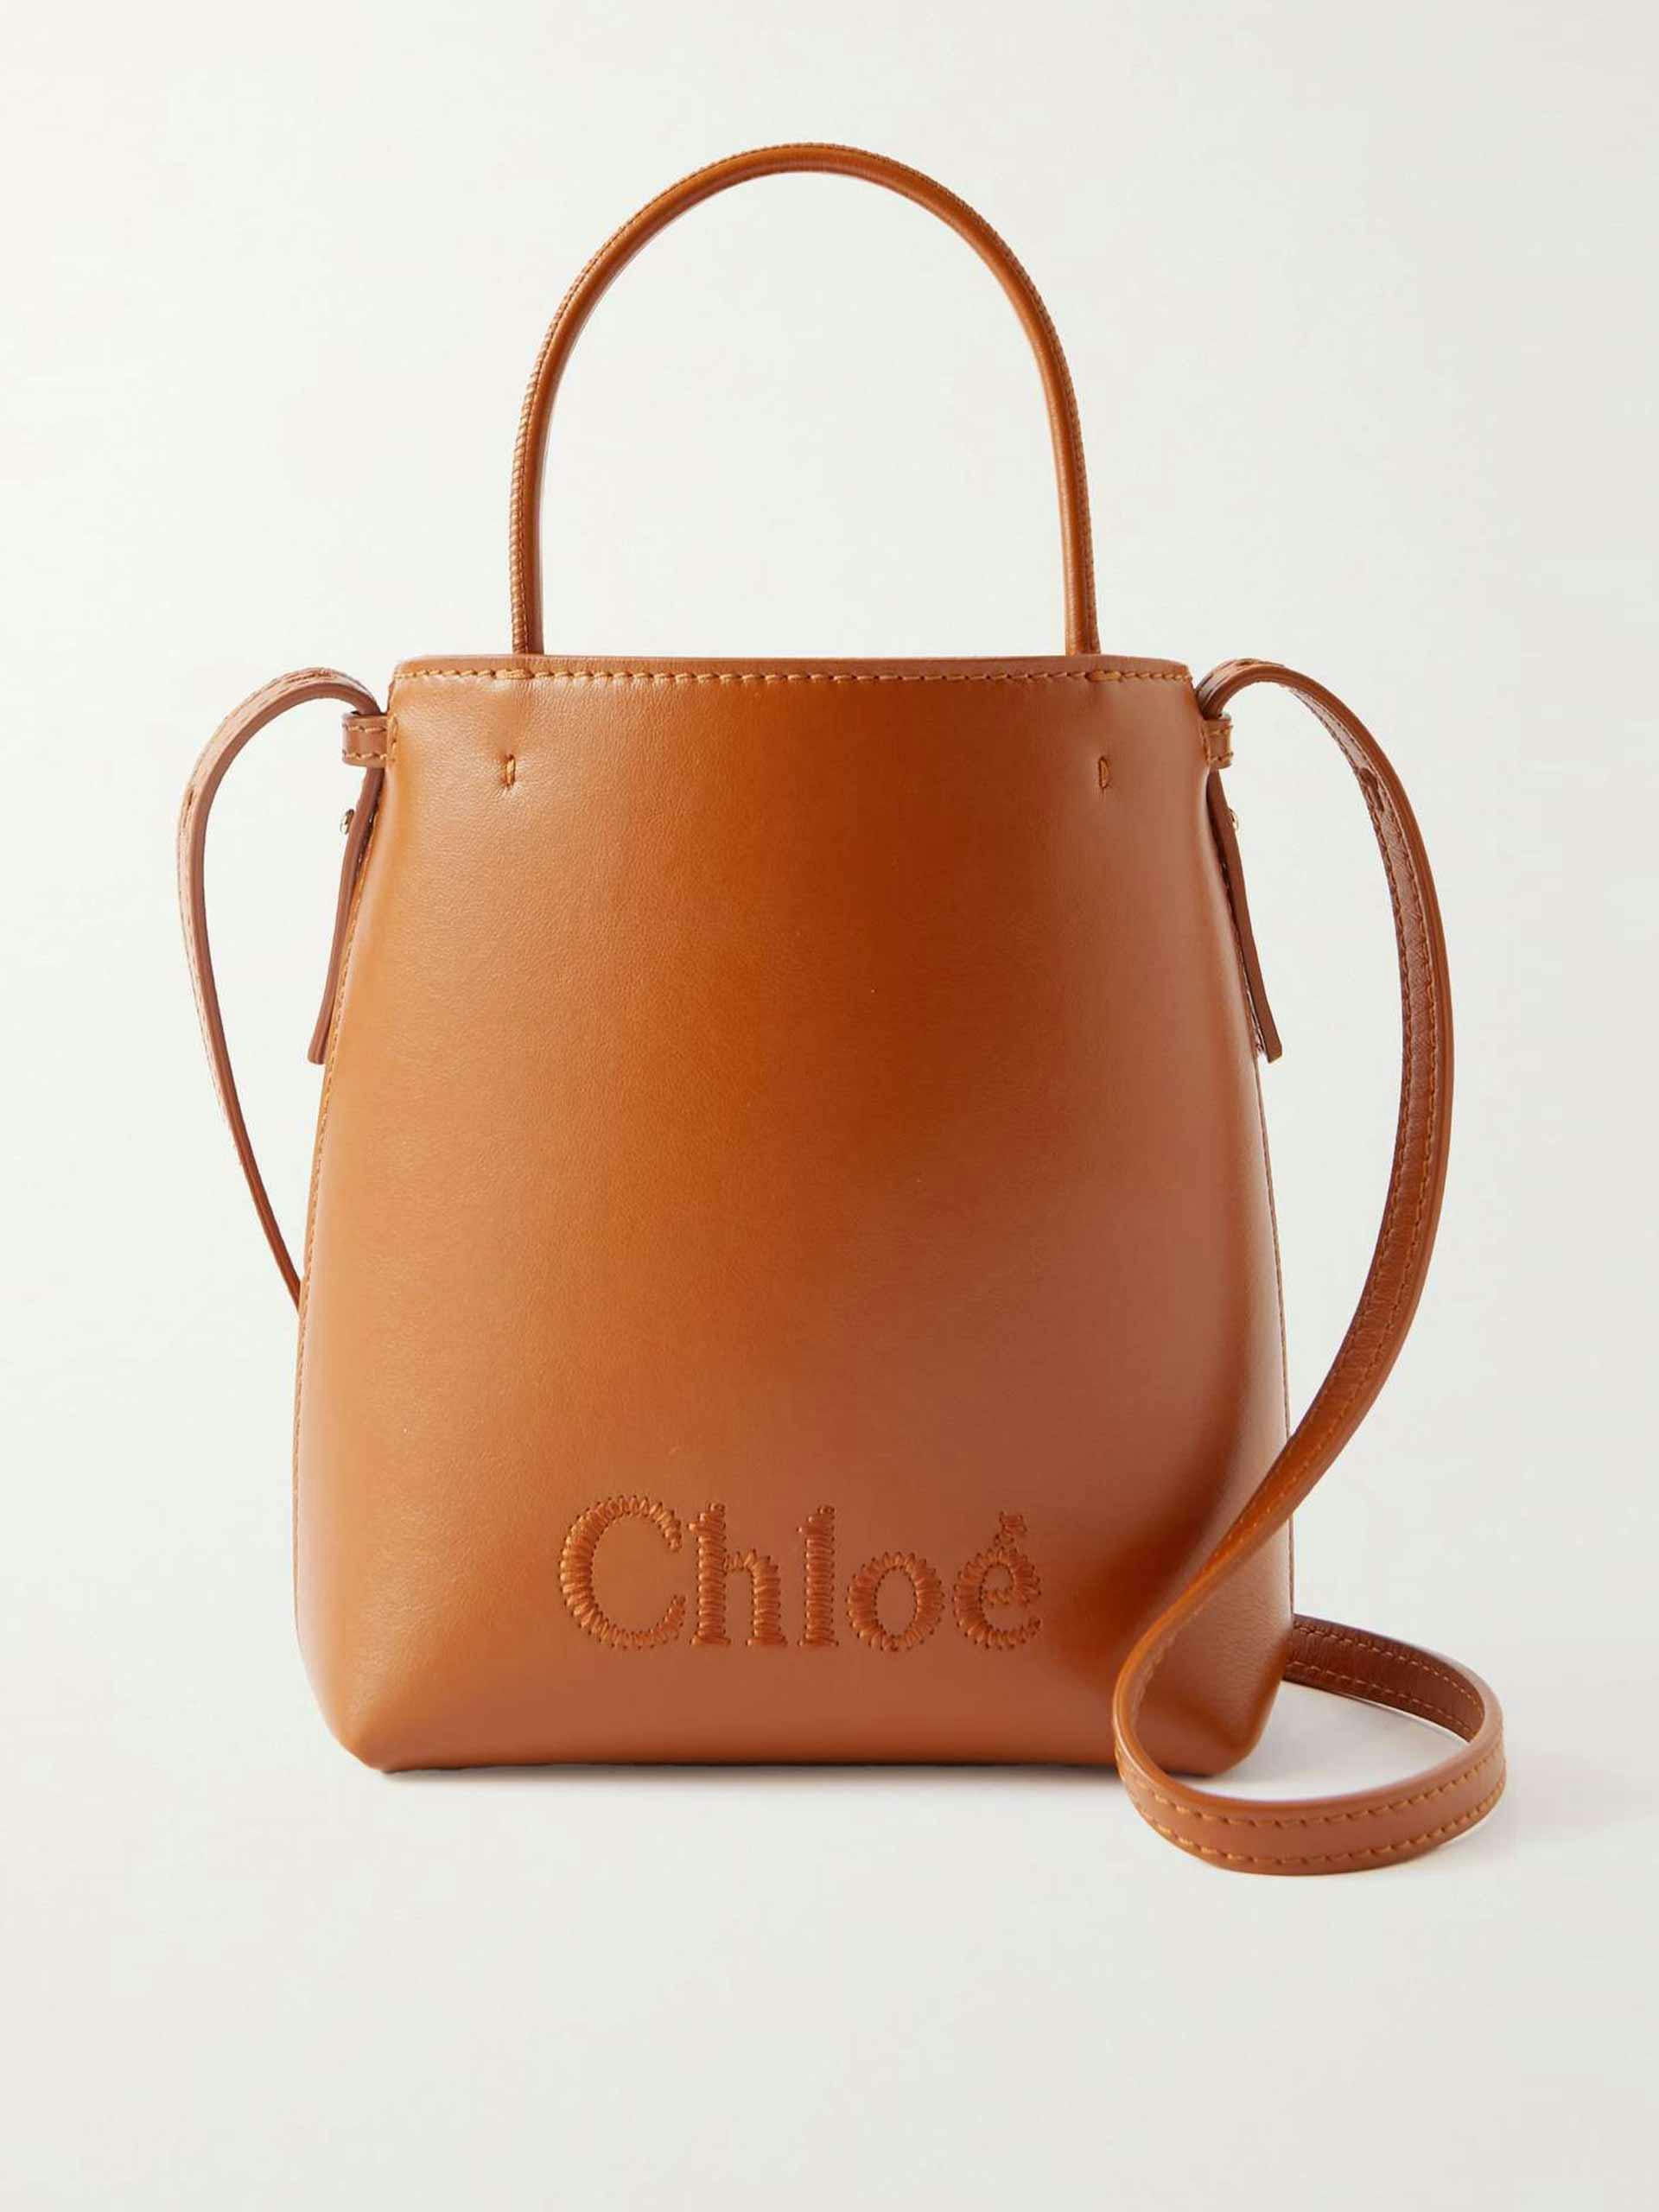 Embroidered tan leather tote